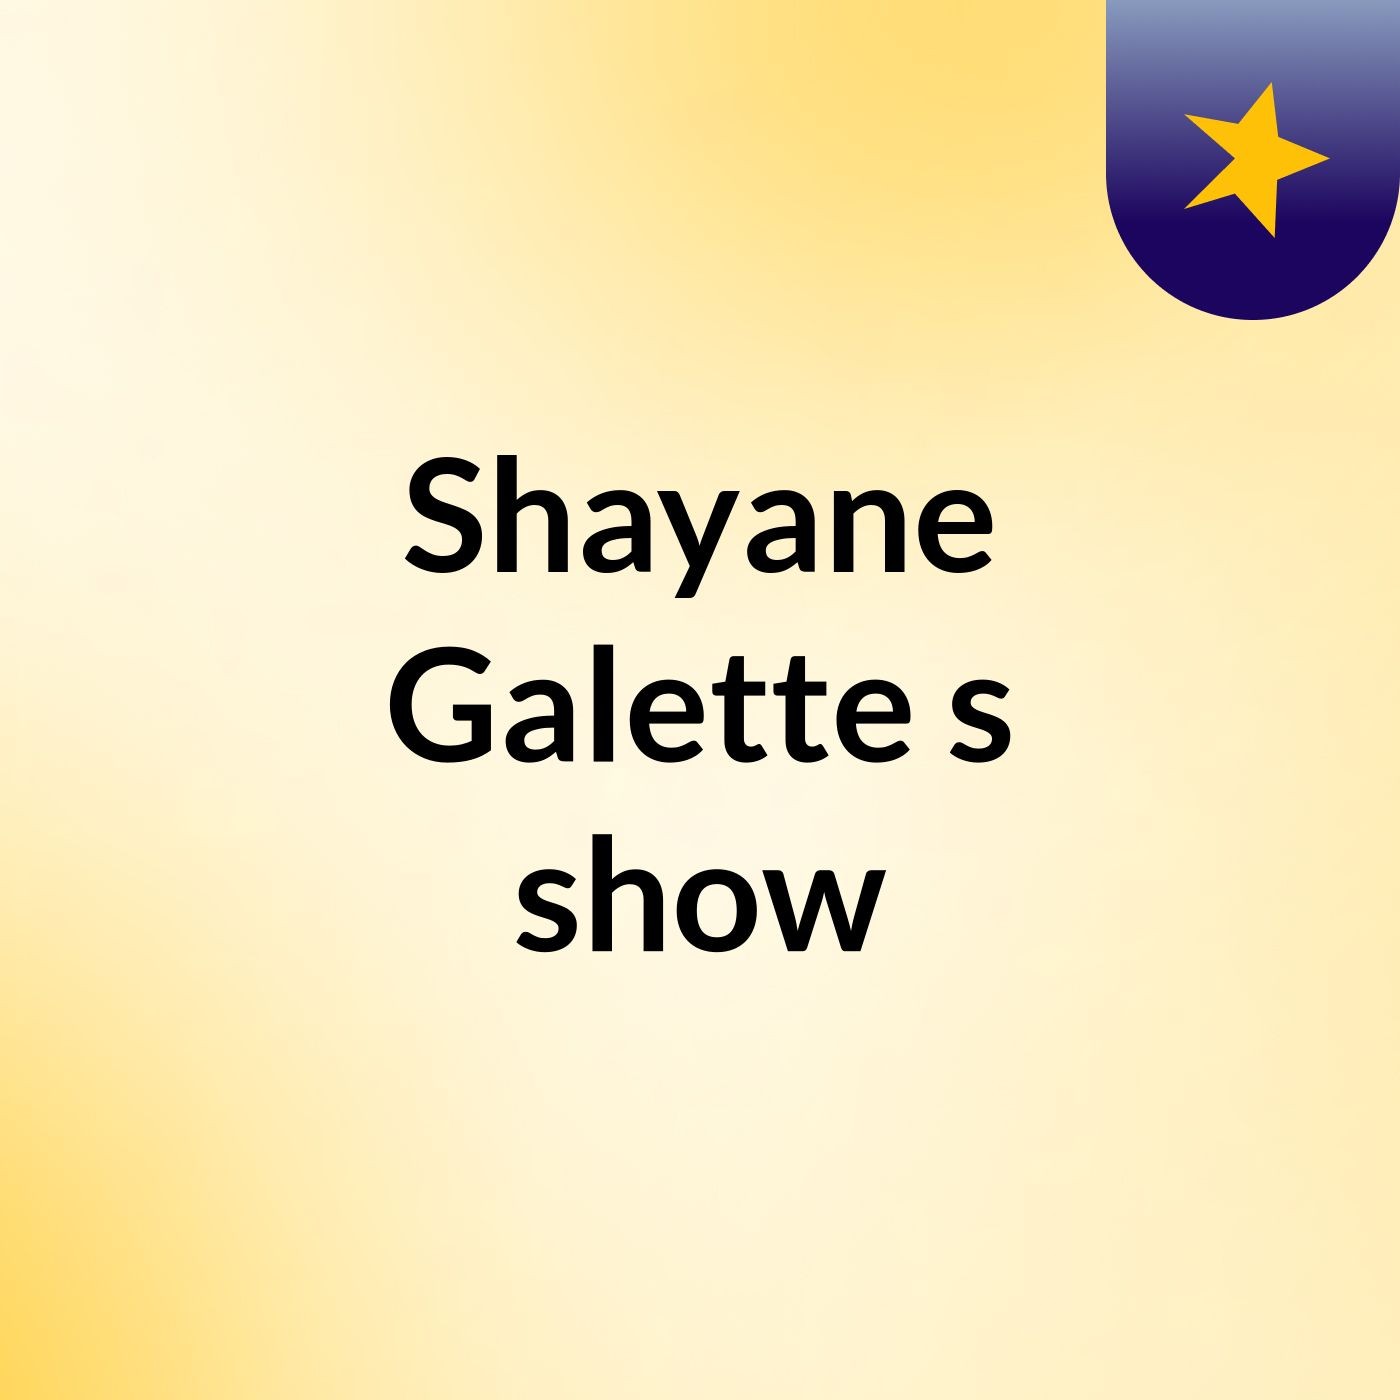 Shayane Galette's show